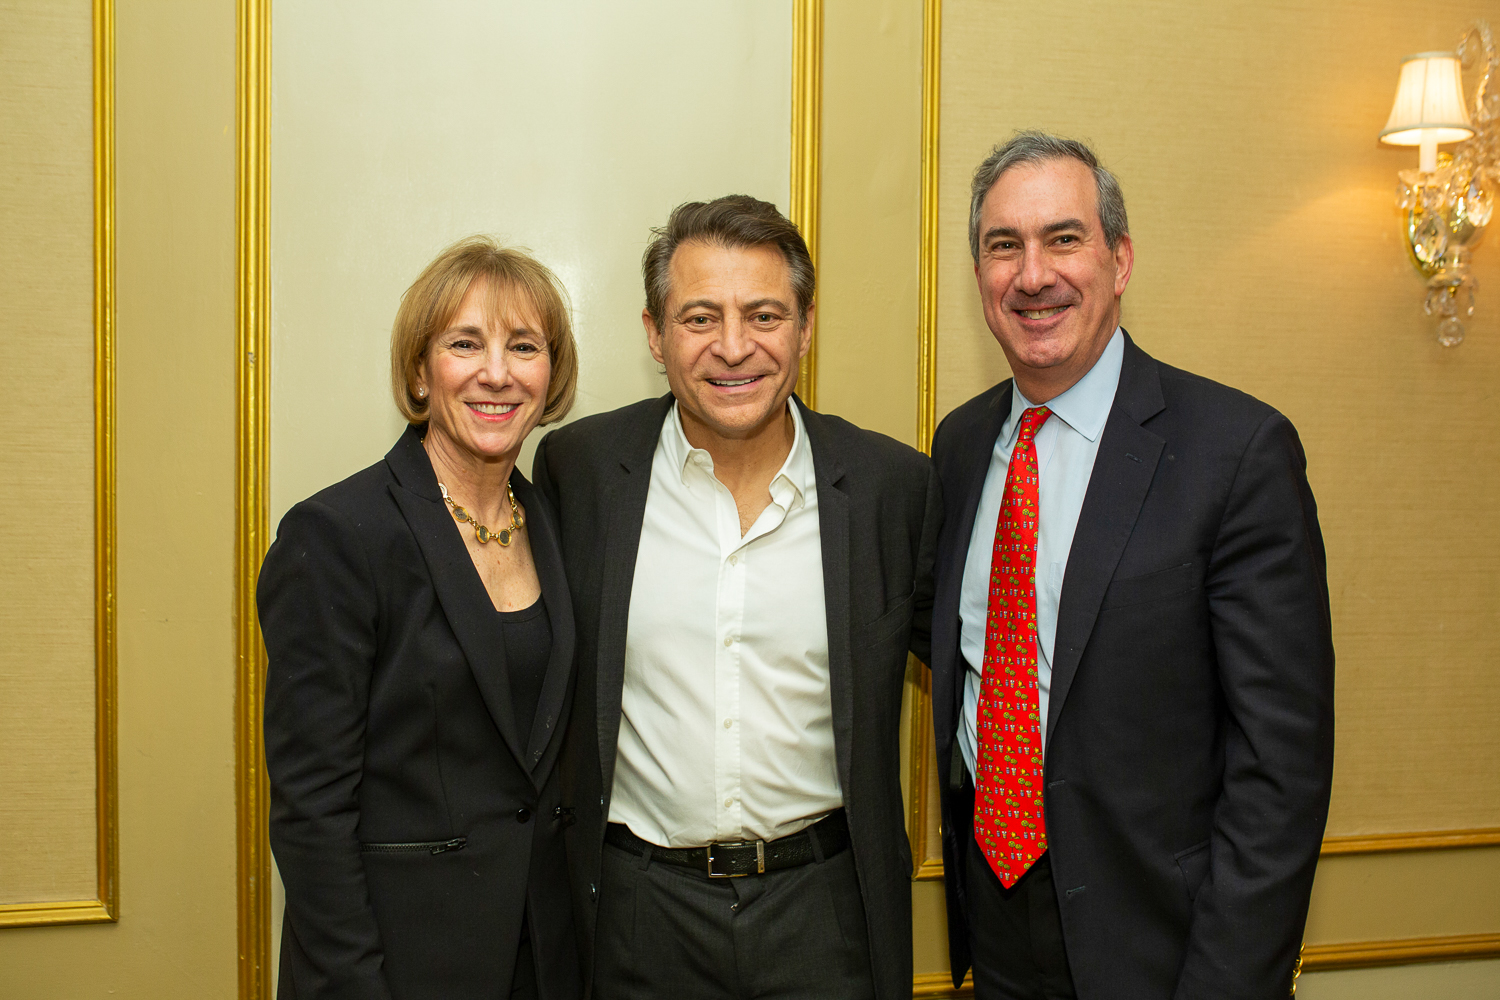 A man and woman stand on either side of Peter Diamandis